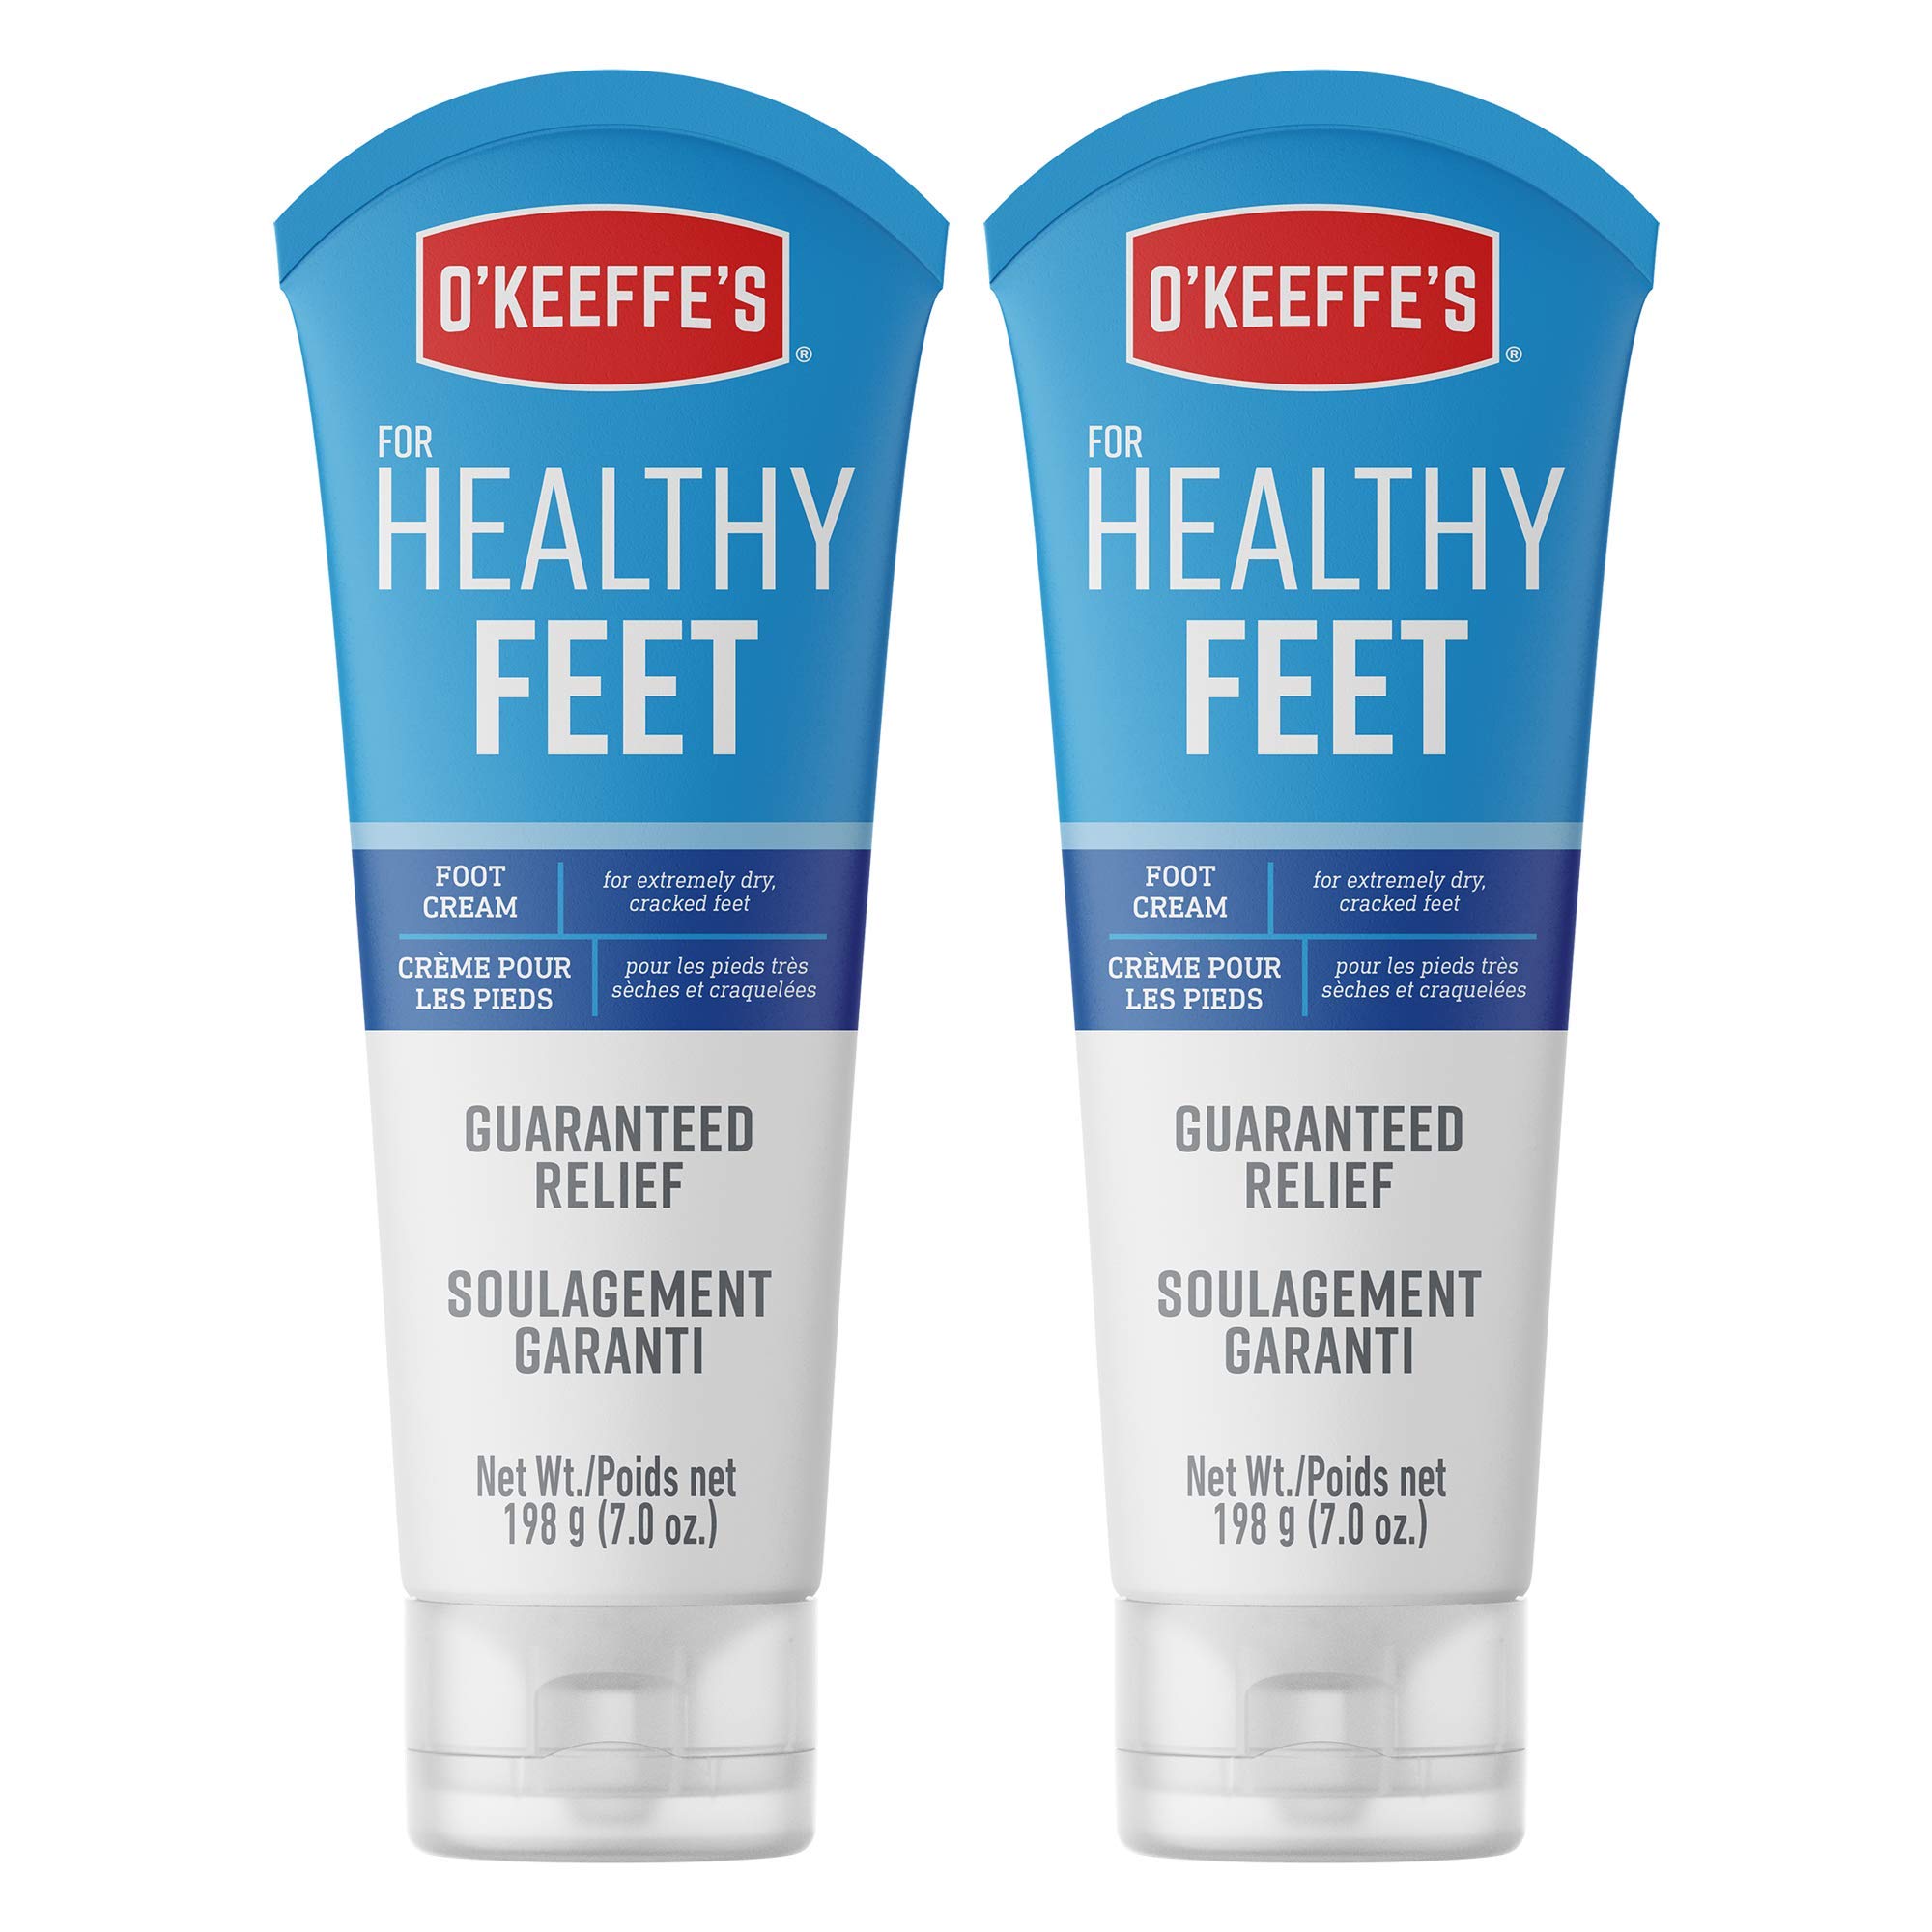 O'Keeffe's for Healthy Feet Foot Cream, Guaranteed Relief for Extremely Dry, Cracked Feet, Clinically Proven to Instantly Boost Moisture Levels, 7.0 Ounce Tube, (Pack of 2)